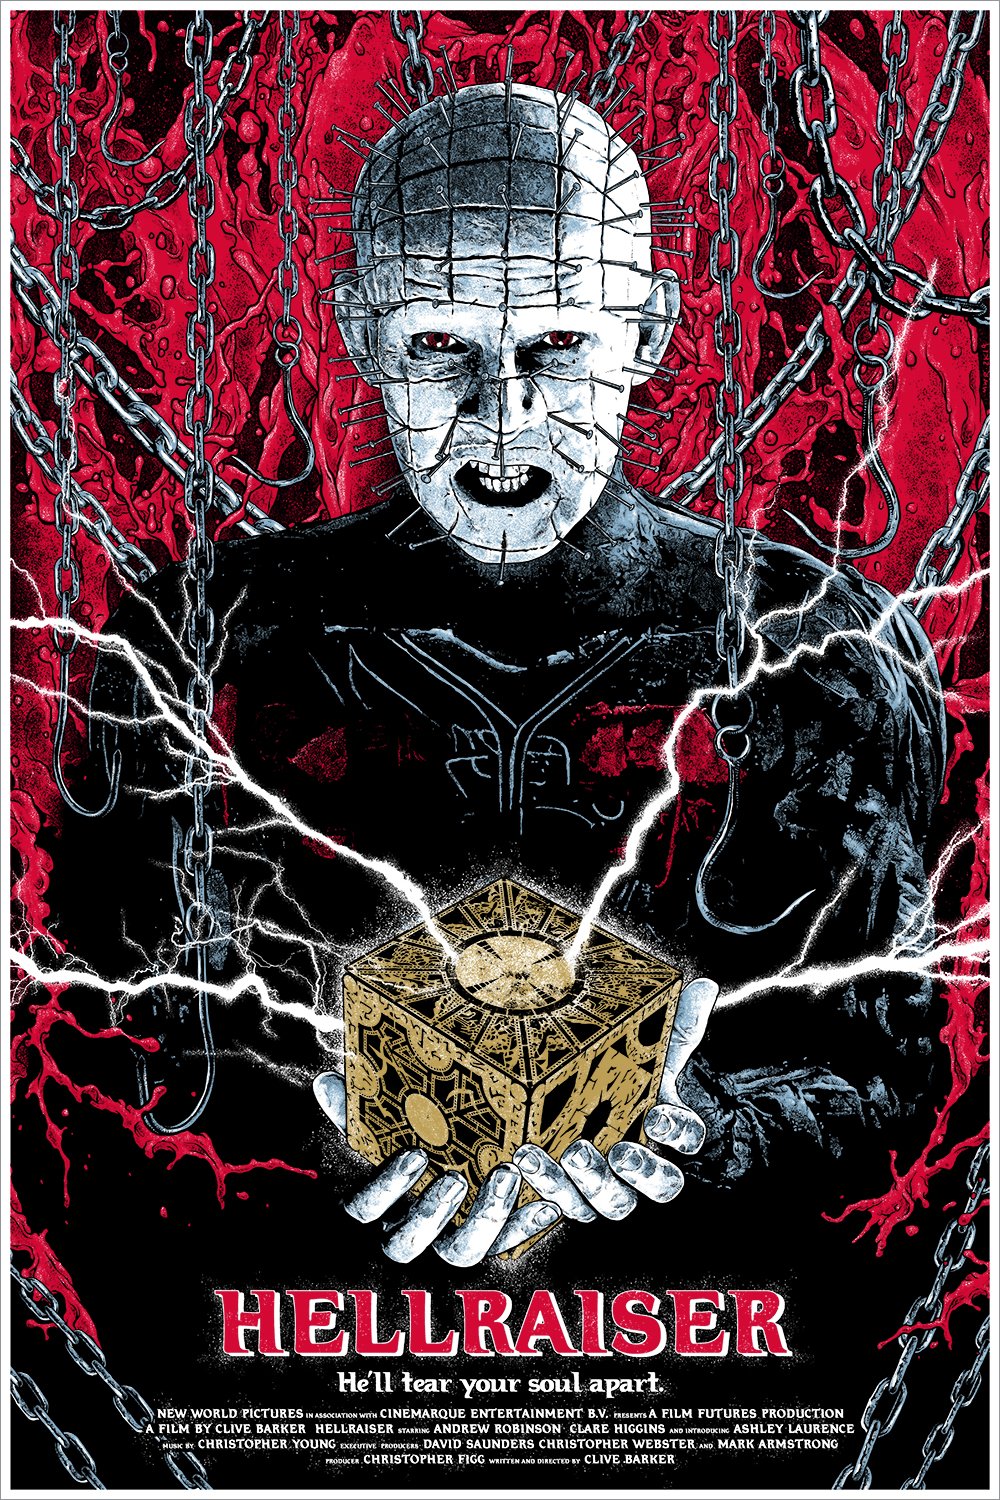 Hellraiser Finds New Director And Writers To Reboot Horrifying Franchise - The Illuminerdi